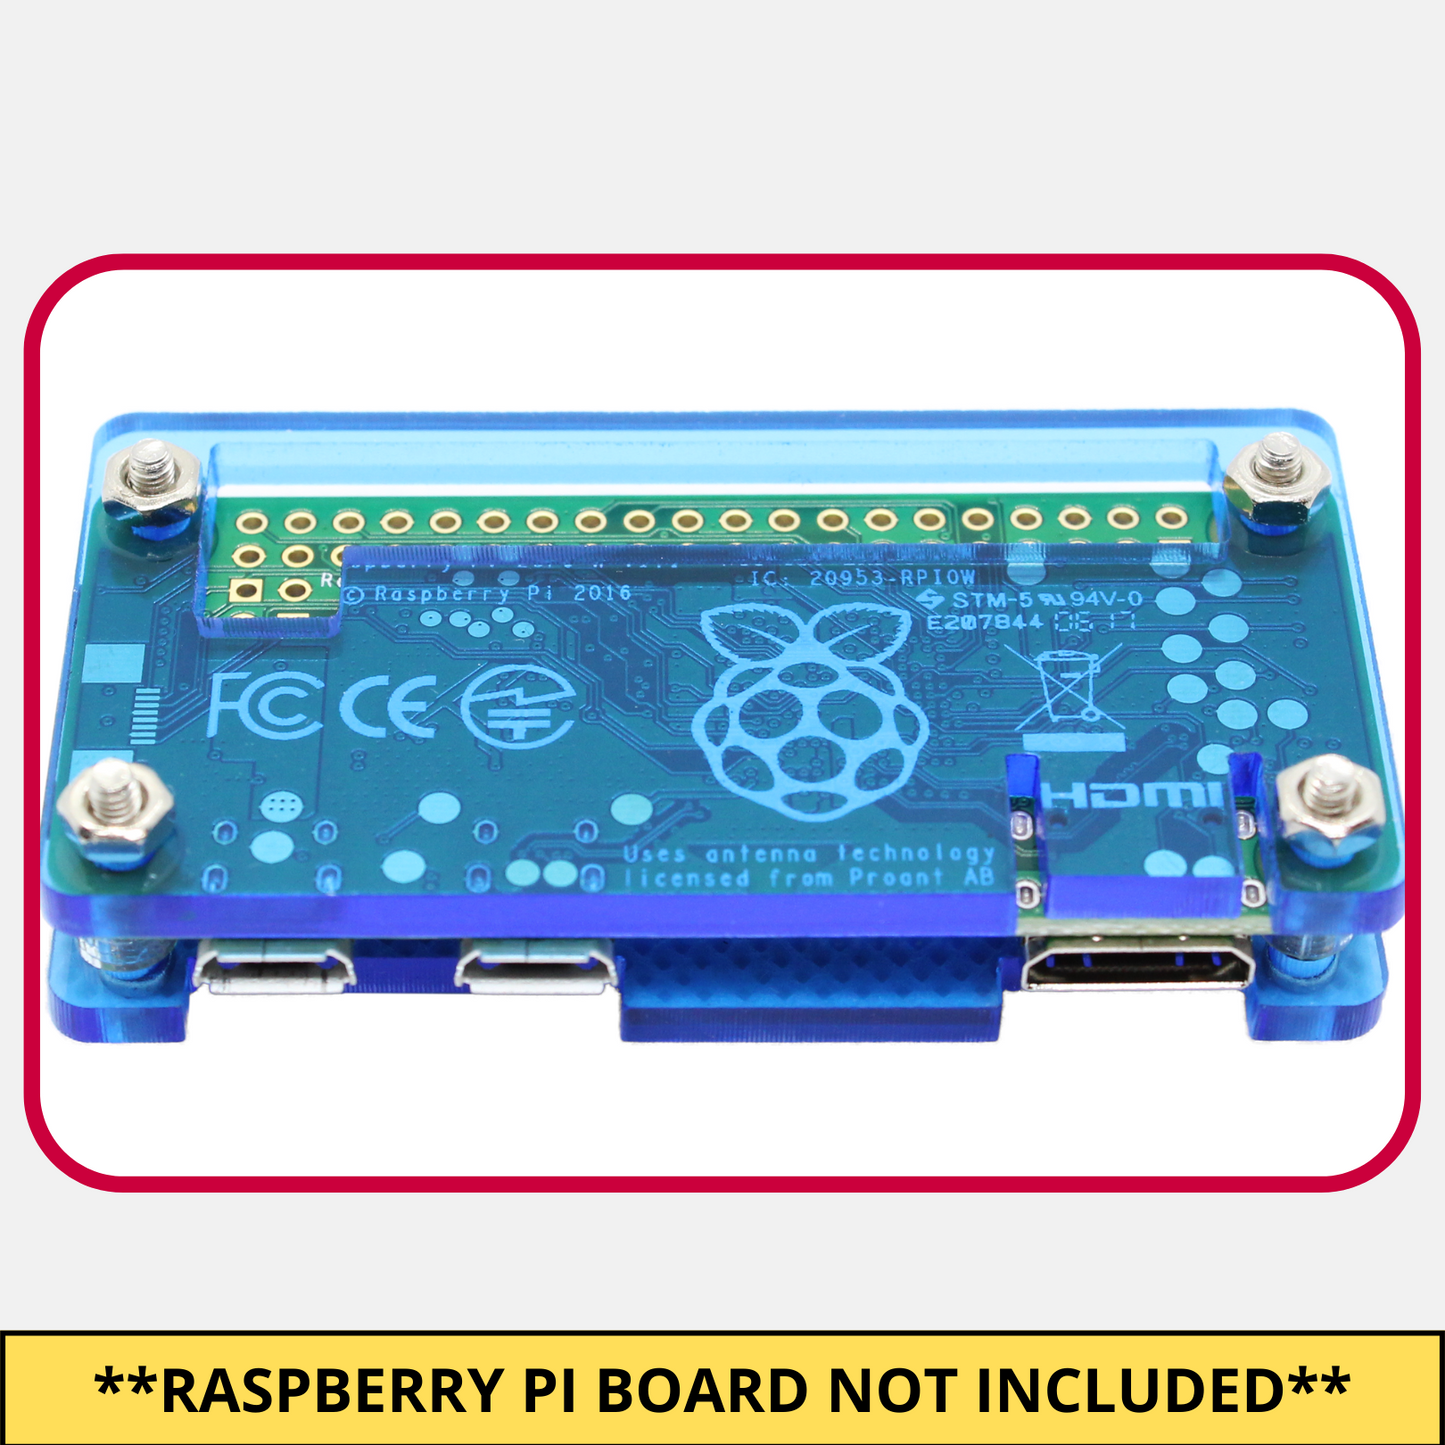 Essential Kit for Raspberry Pi Zero 2 W | 128GB Ultra Preloaded Card | Protective Case | Power Supply | On/Off Switch Cable | 20Pin GPIO Header | Heatsink | Compatible with Pi Zero 2 W, 1.3, W